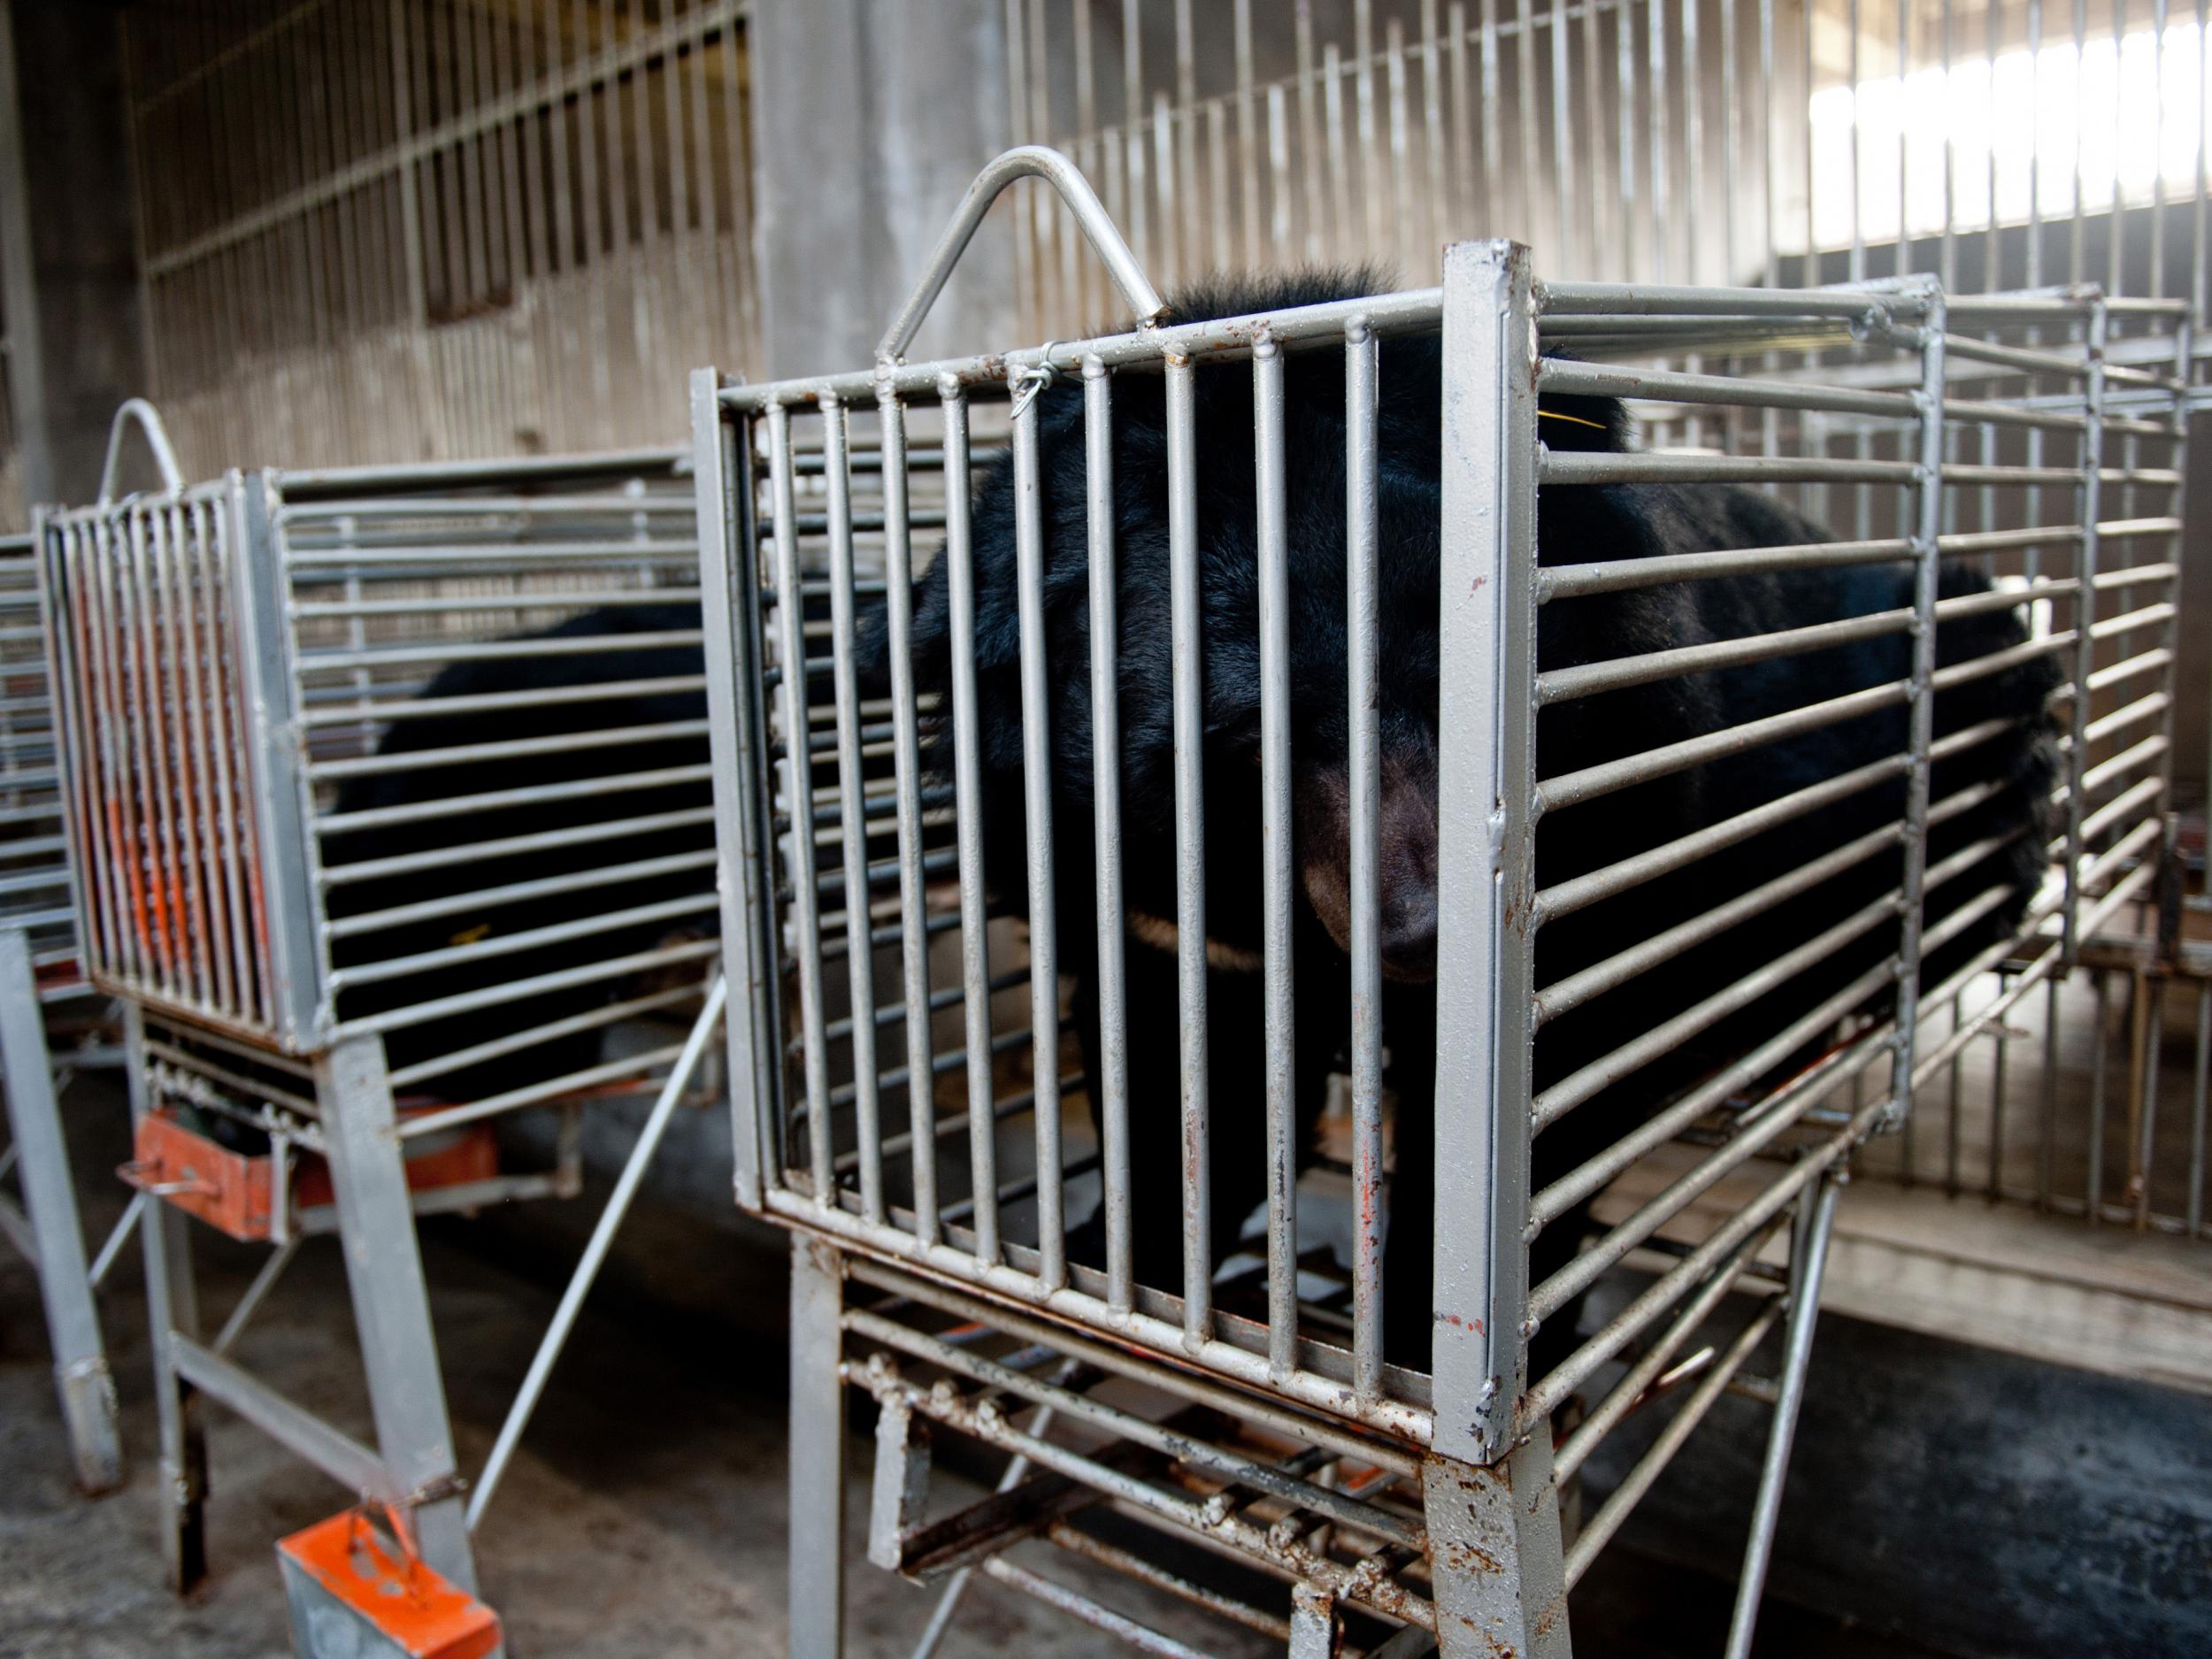 Bears are caged before having their bile drained at a farm in China